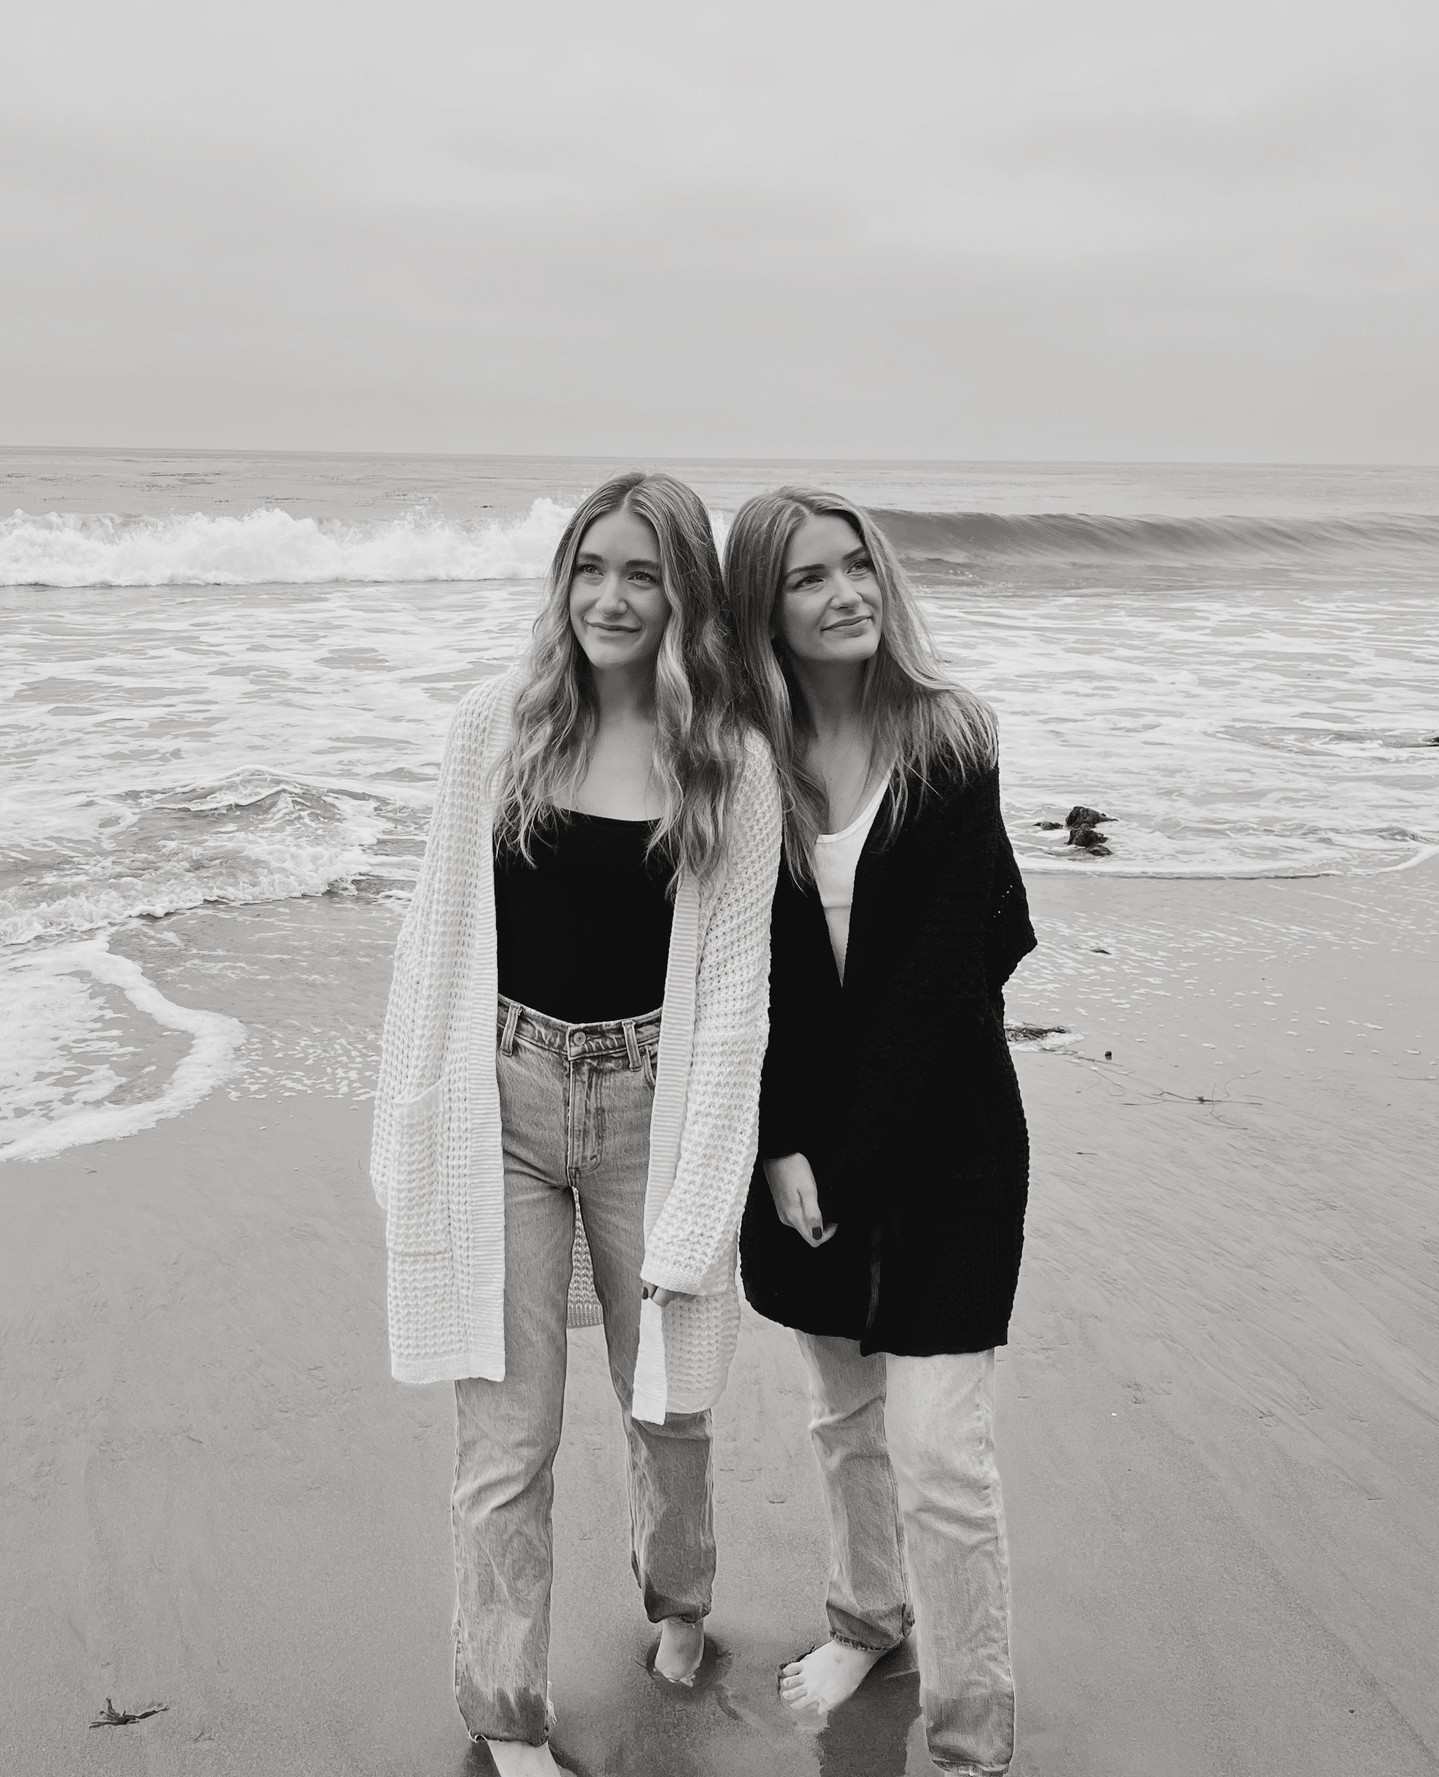 Our So Little Time shoot was so dreamy. We forget how beautiful Malibu is!